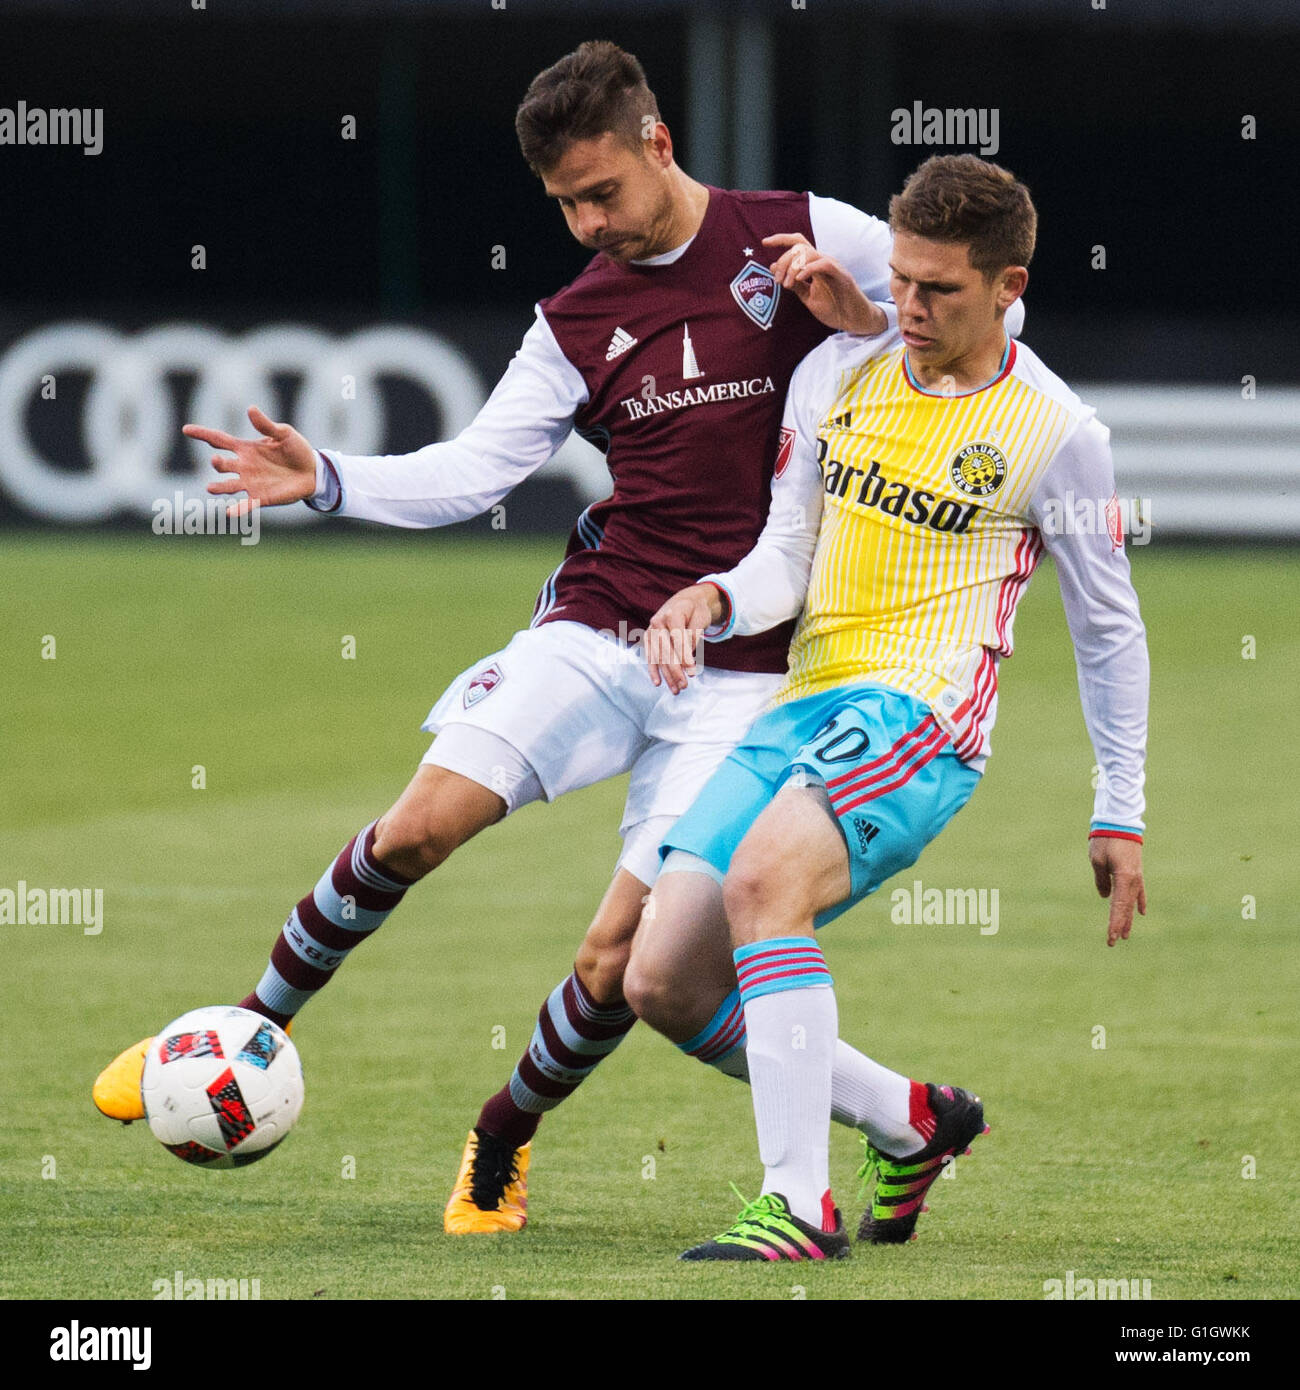 Columbus, Ohio, USA. May 14, 2016. Columbus Crew SC midfielder Wil Trapp (right) and Colorado Rapids forward Luis Solignac (21) fight for the ball in their regular season match. Columbus, Ohio USA. (Brent Clark/Alamy Live News) Stock Photo